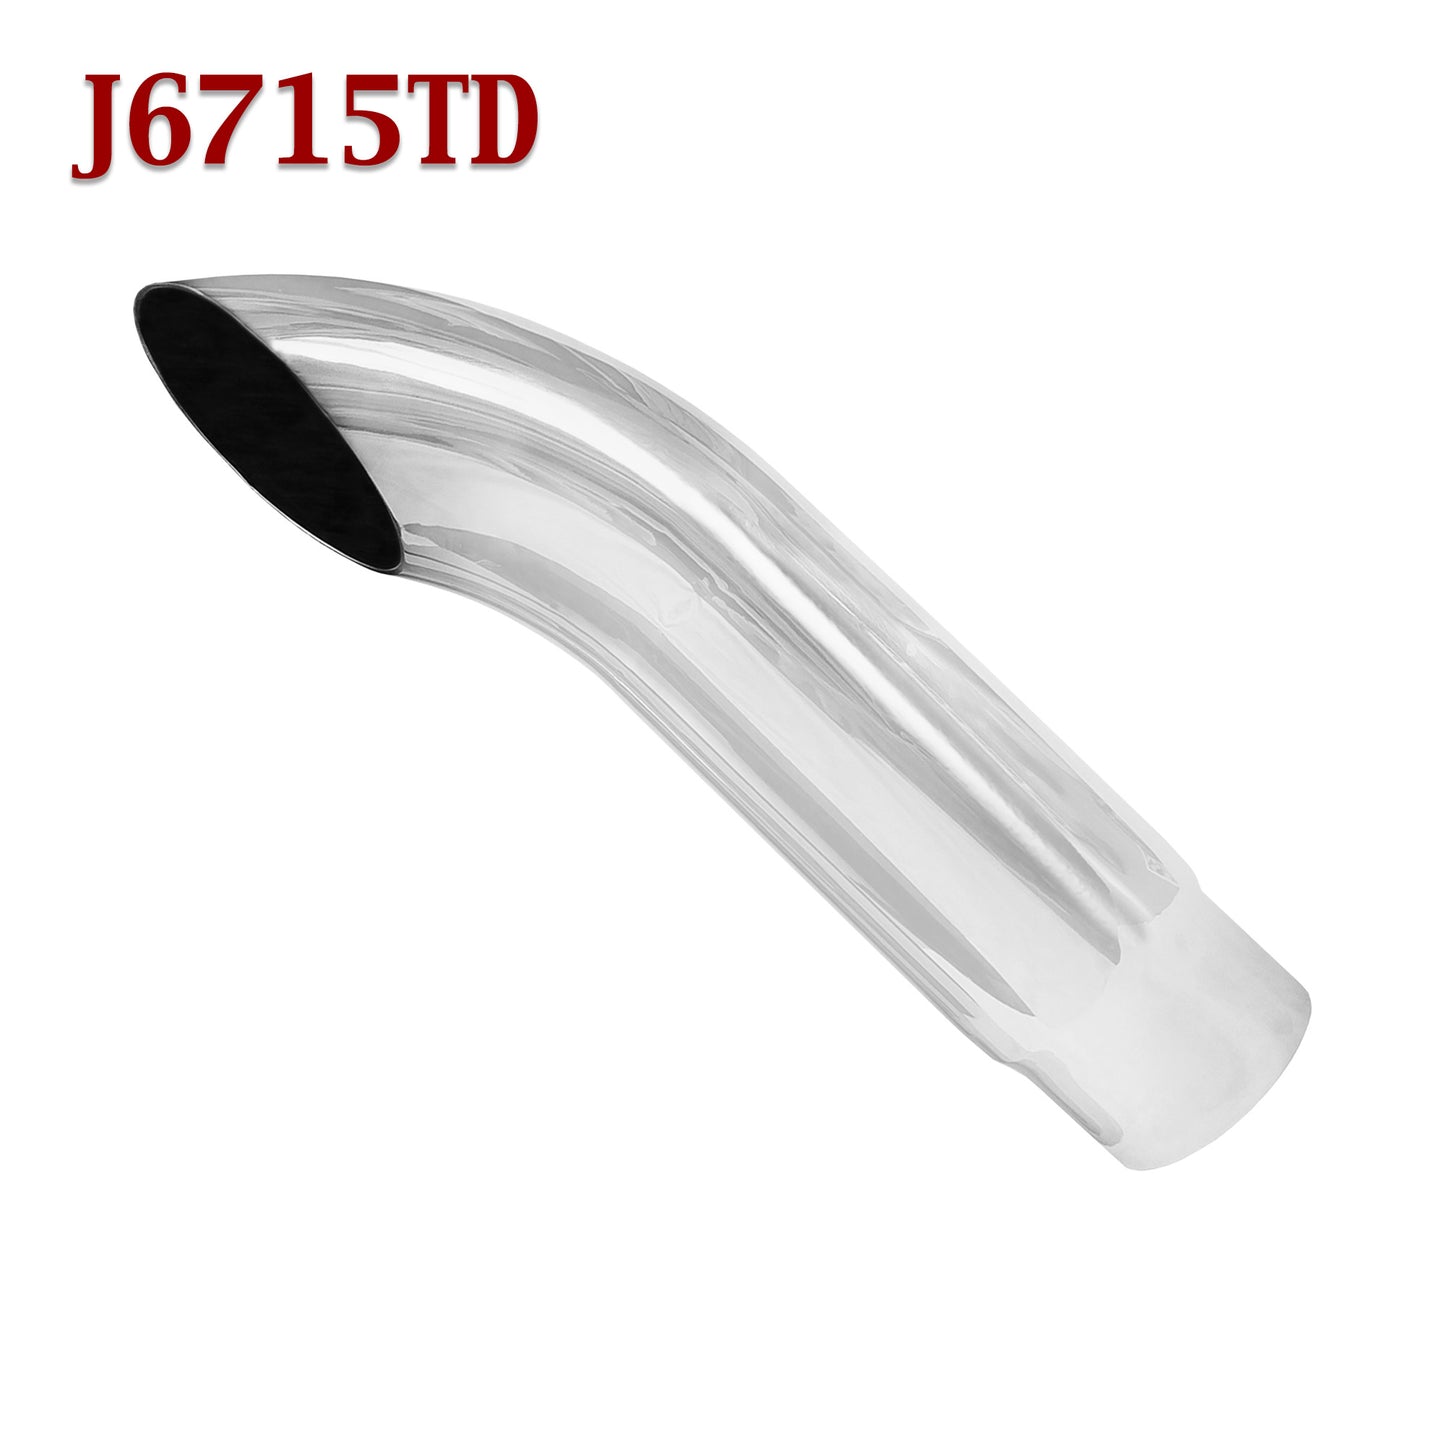 J6715TD 3" Inlet Stainless Steel Turn Down Exhaust Tip 3 1/2" Outlet / 16" Long